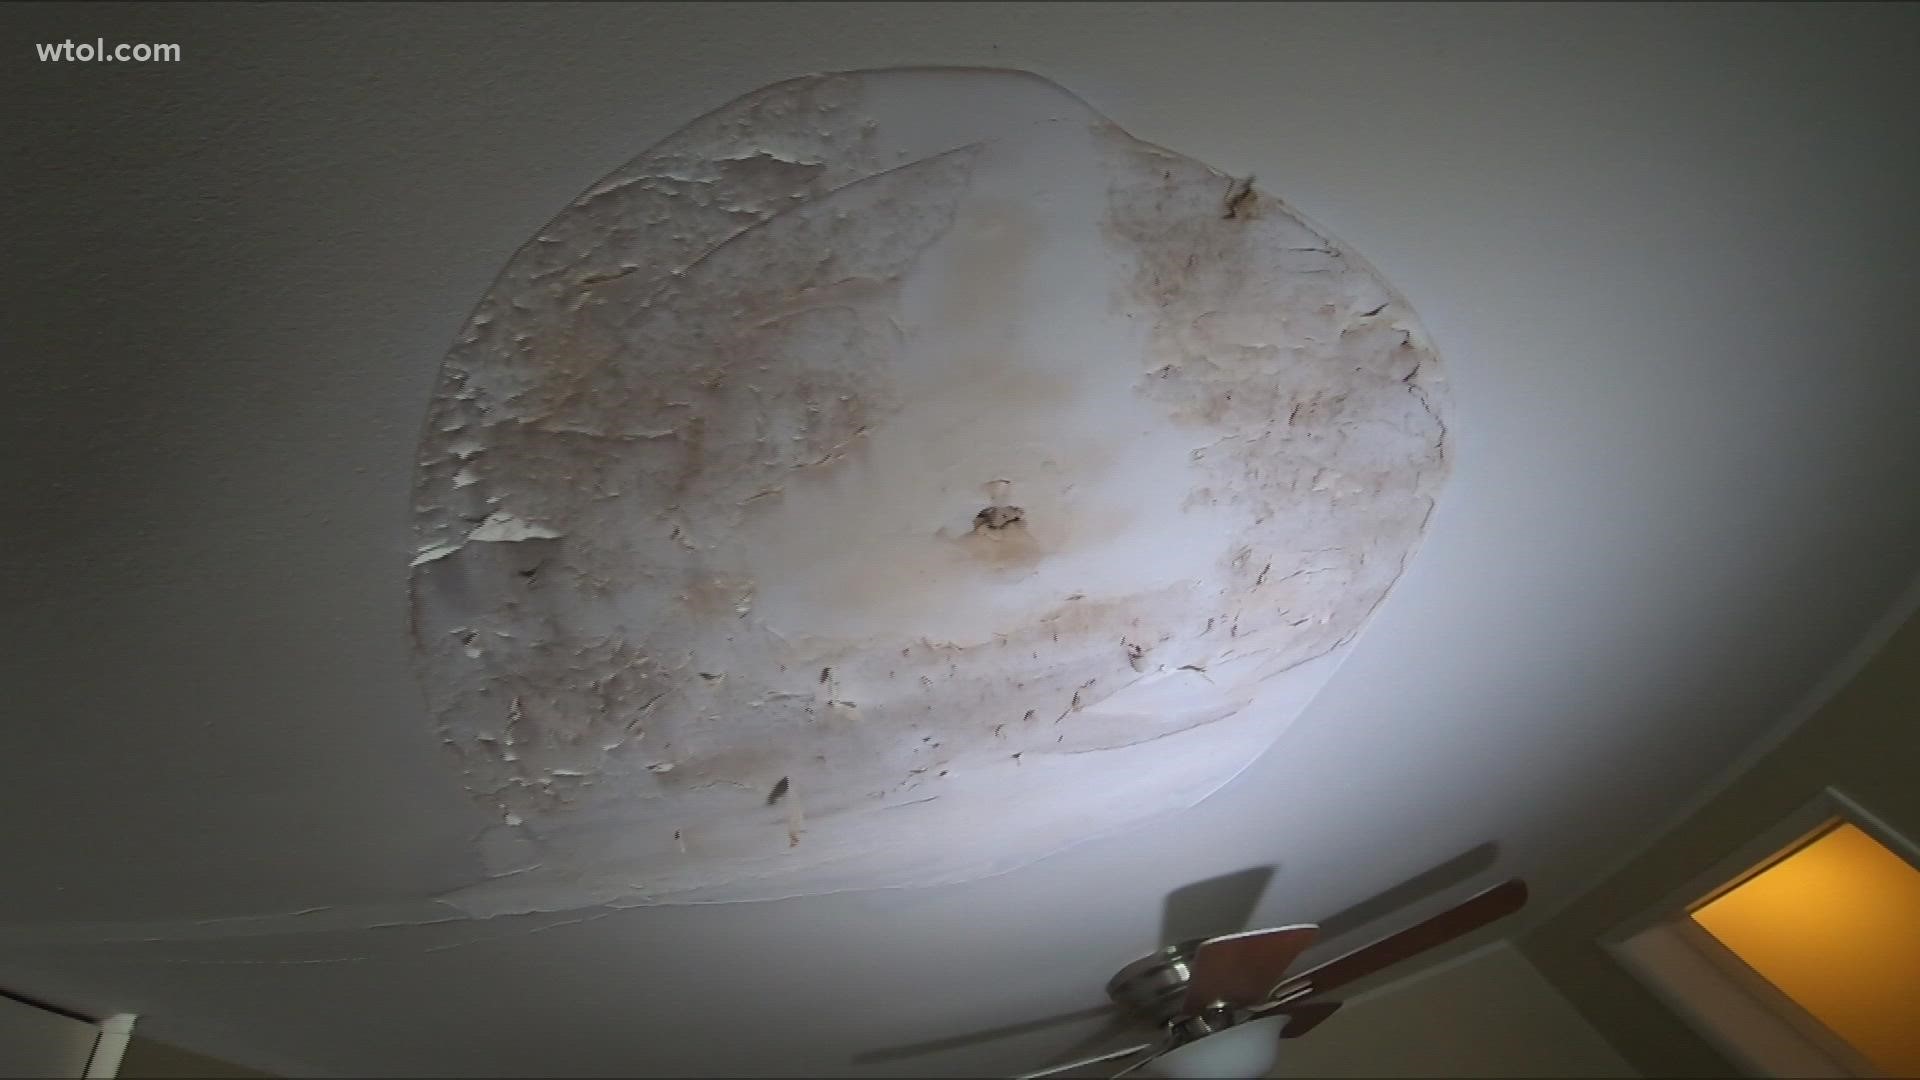 The landlord says repairs are happening, but tenants say they are seeing mold and more water in their apartments.